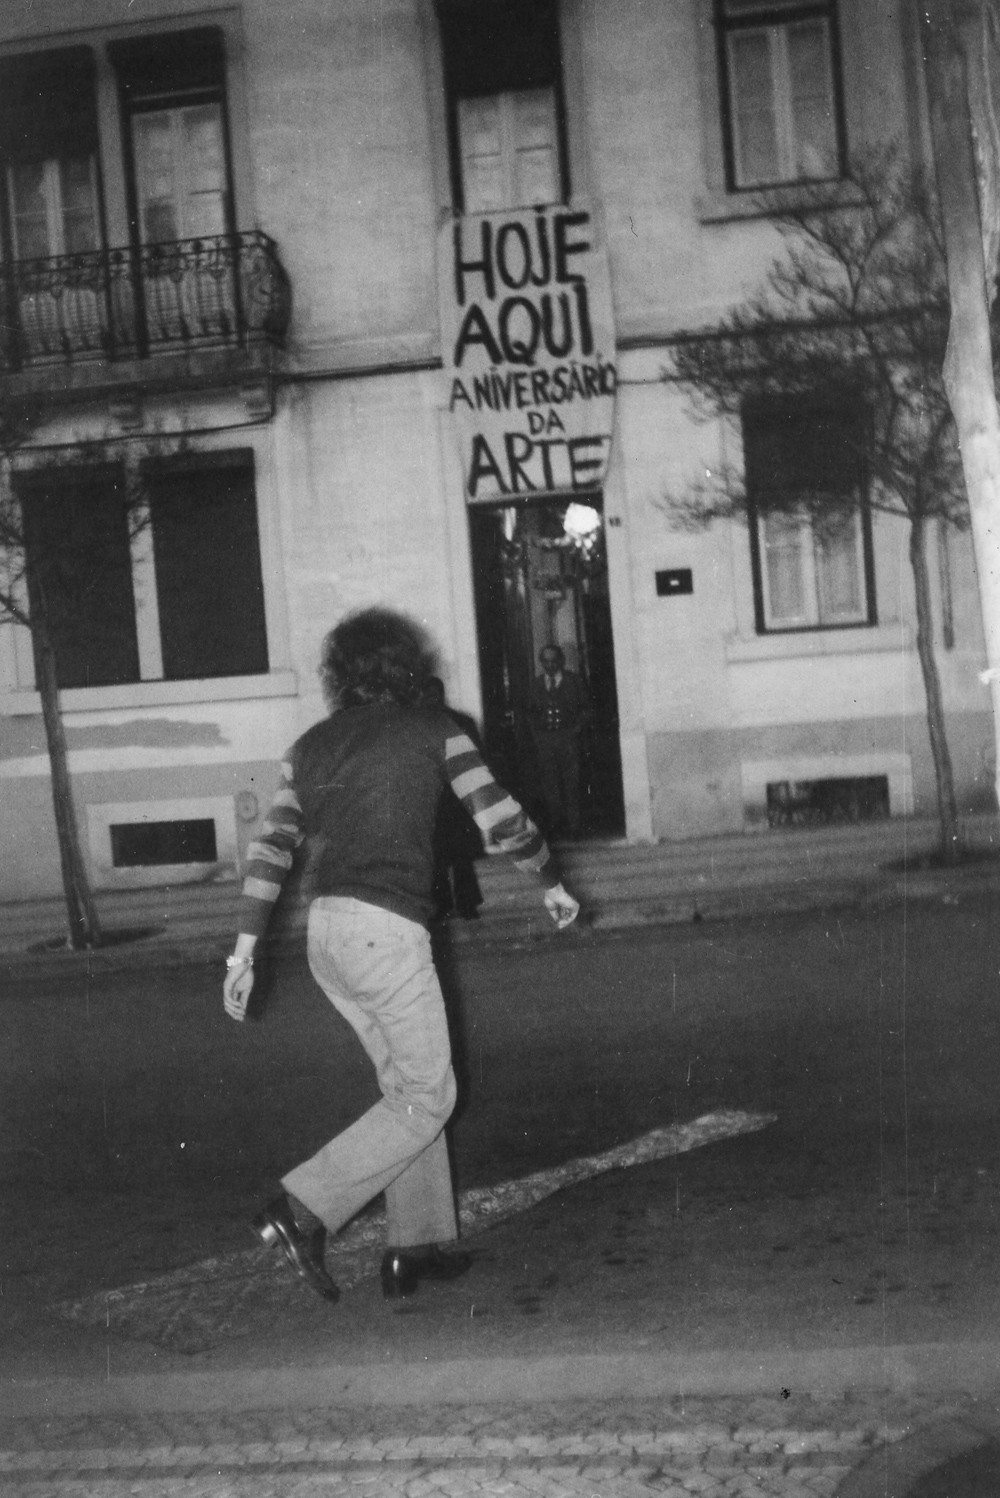  Anniversary of Art, CAPC, 1974. Performance by Albuquerque Mendes. 